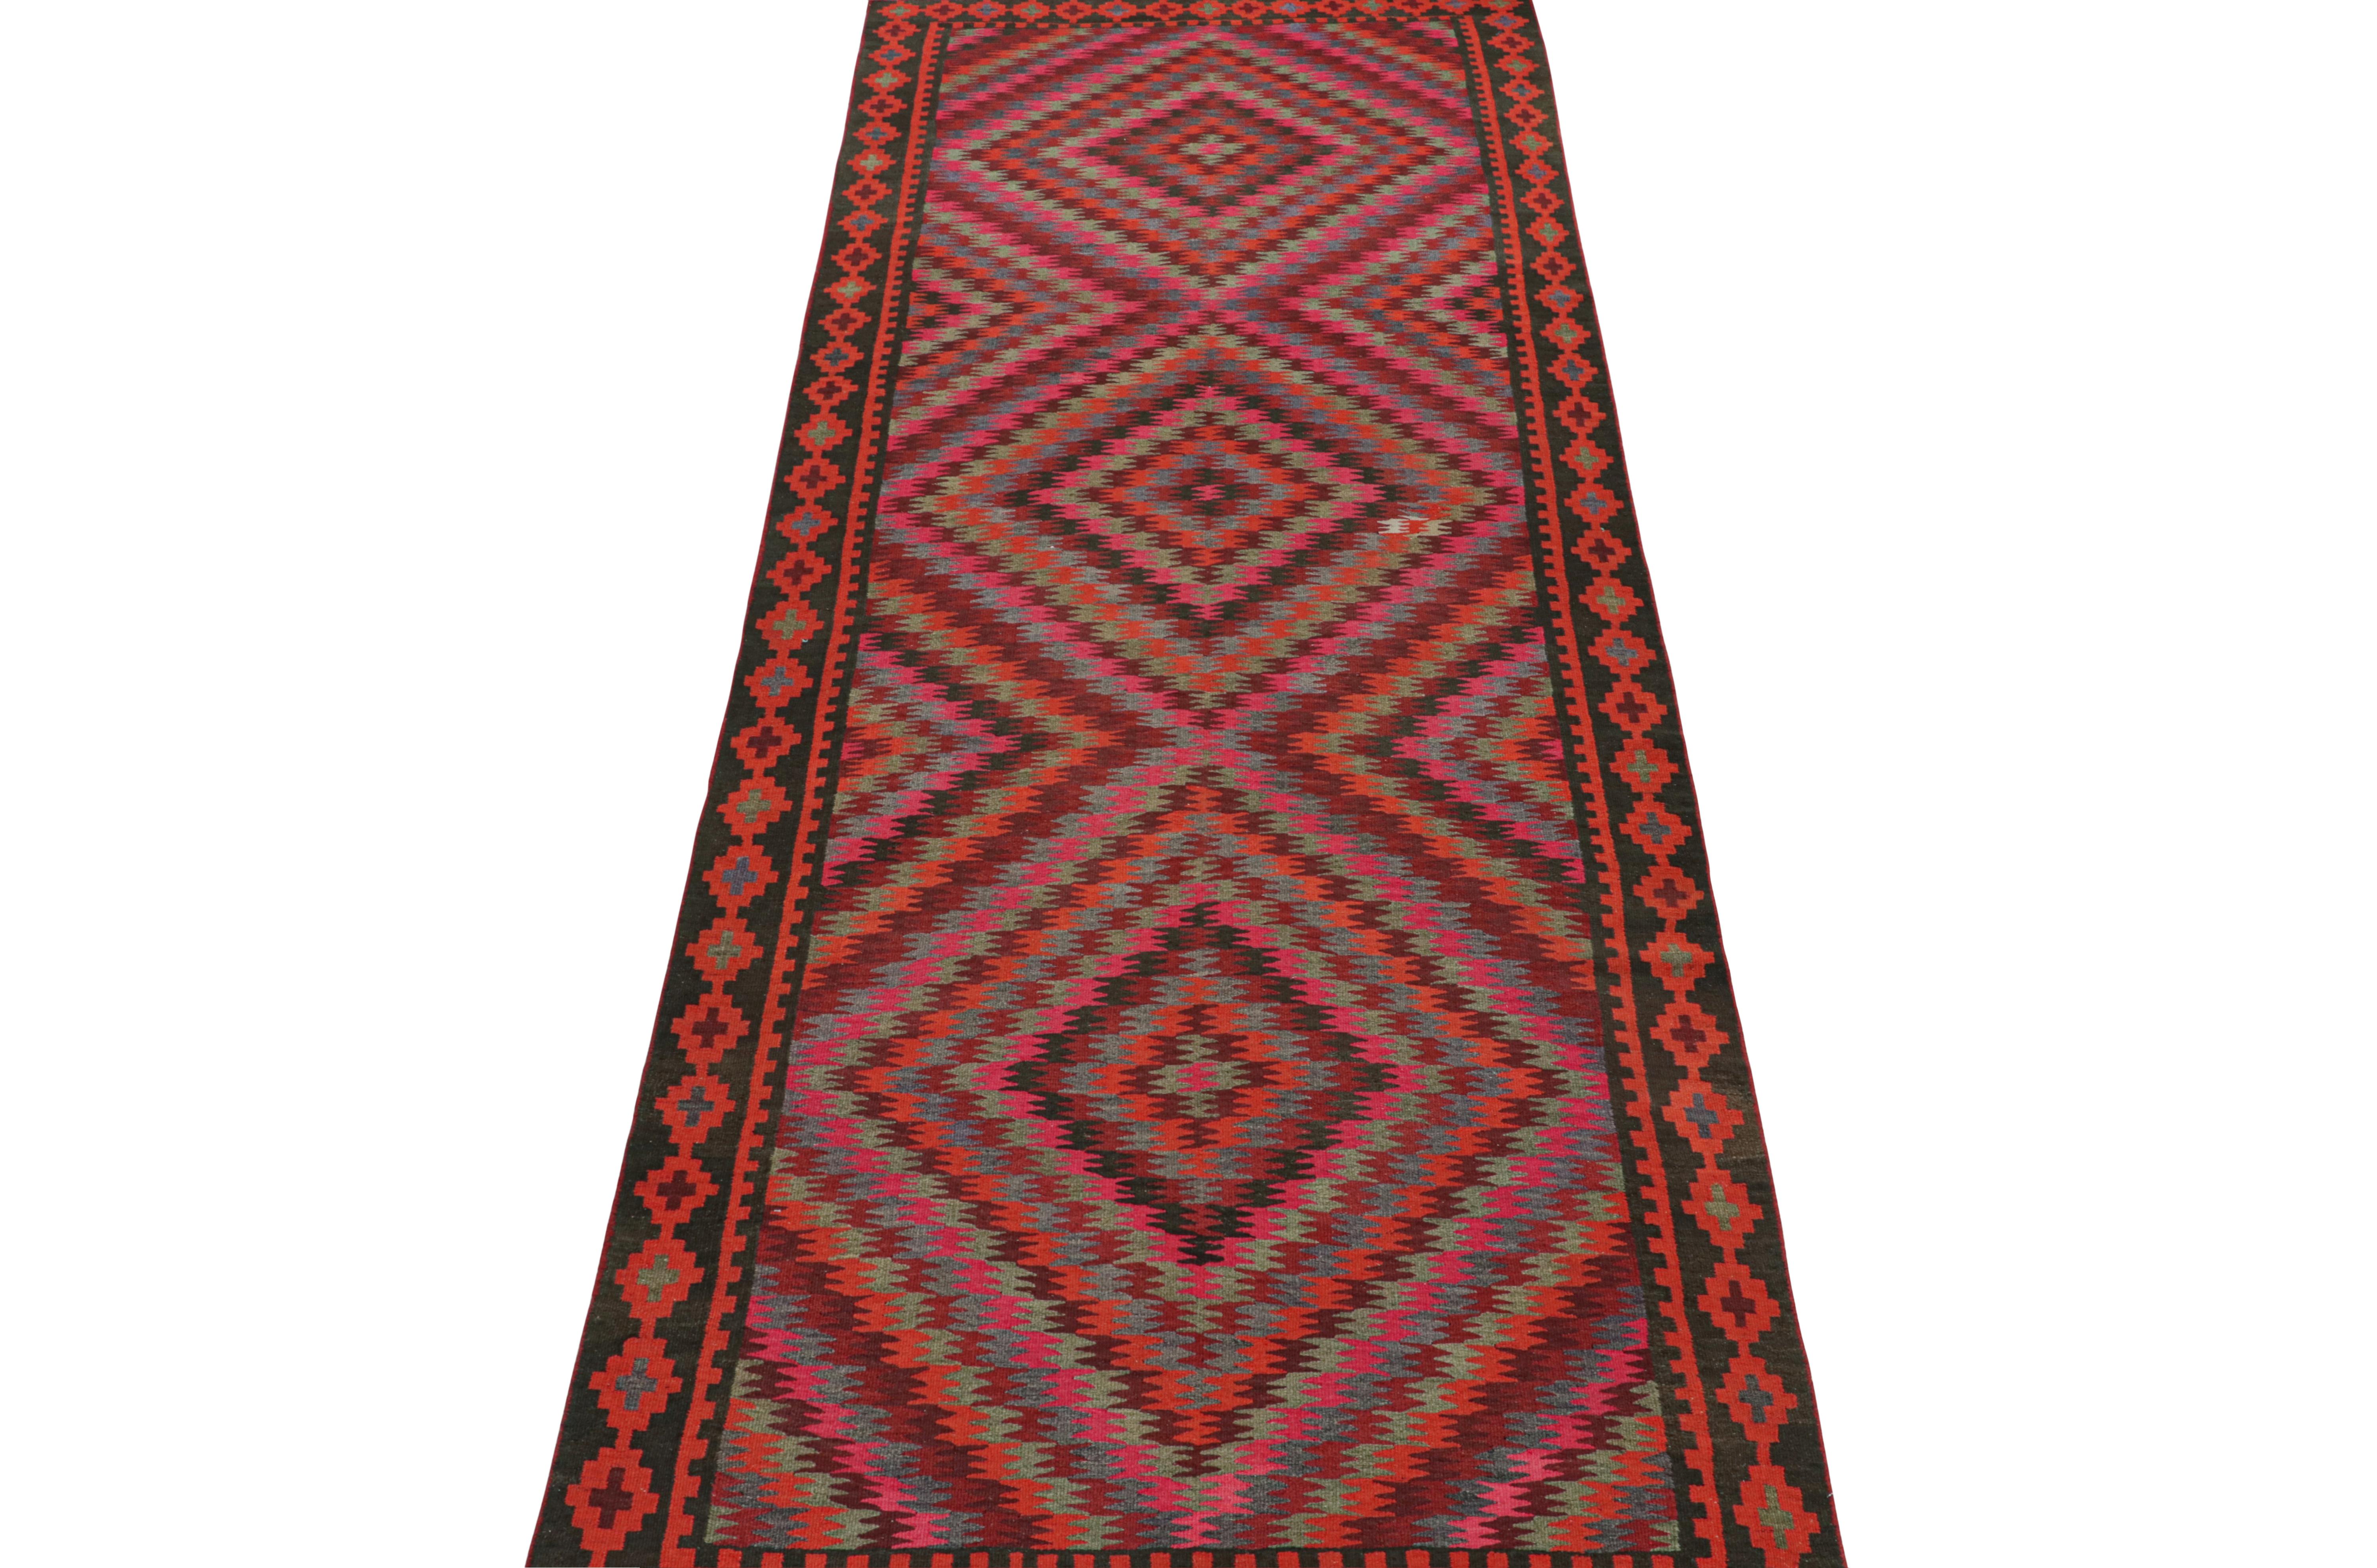 This vintage 6x15 Kilim is a new addition of Bidjar provenance in Rug & Kilim's rare tribal curations. Handwoven in wool, it originates from Turkey circa 1950-1960.
Further on the Design: 
Bidjar Kilims like this are reputed for their durability